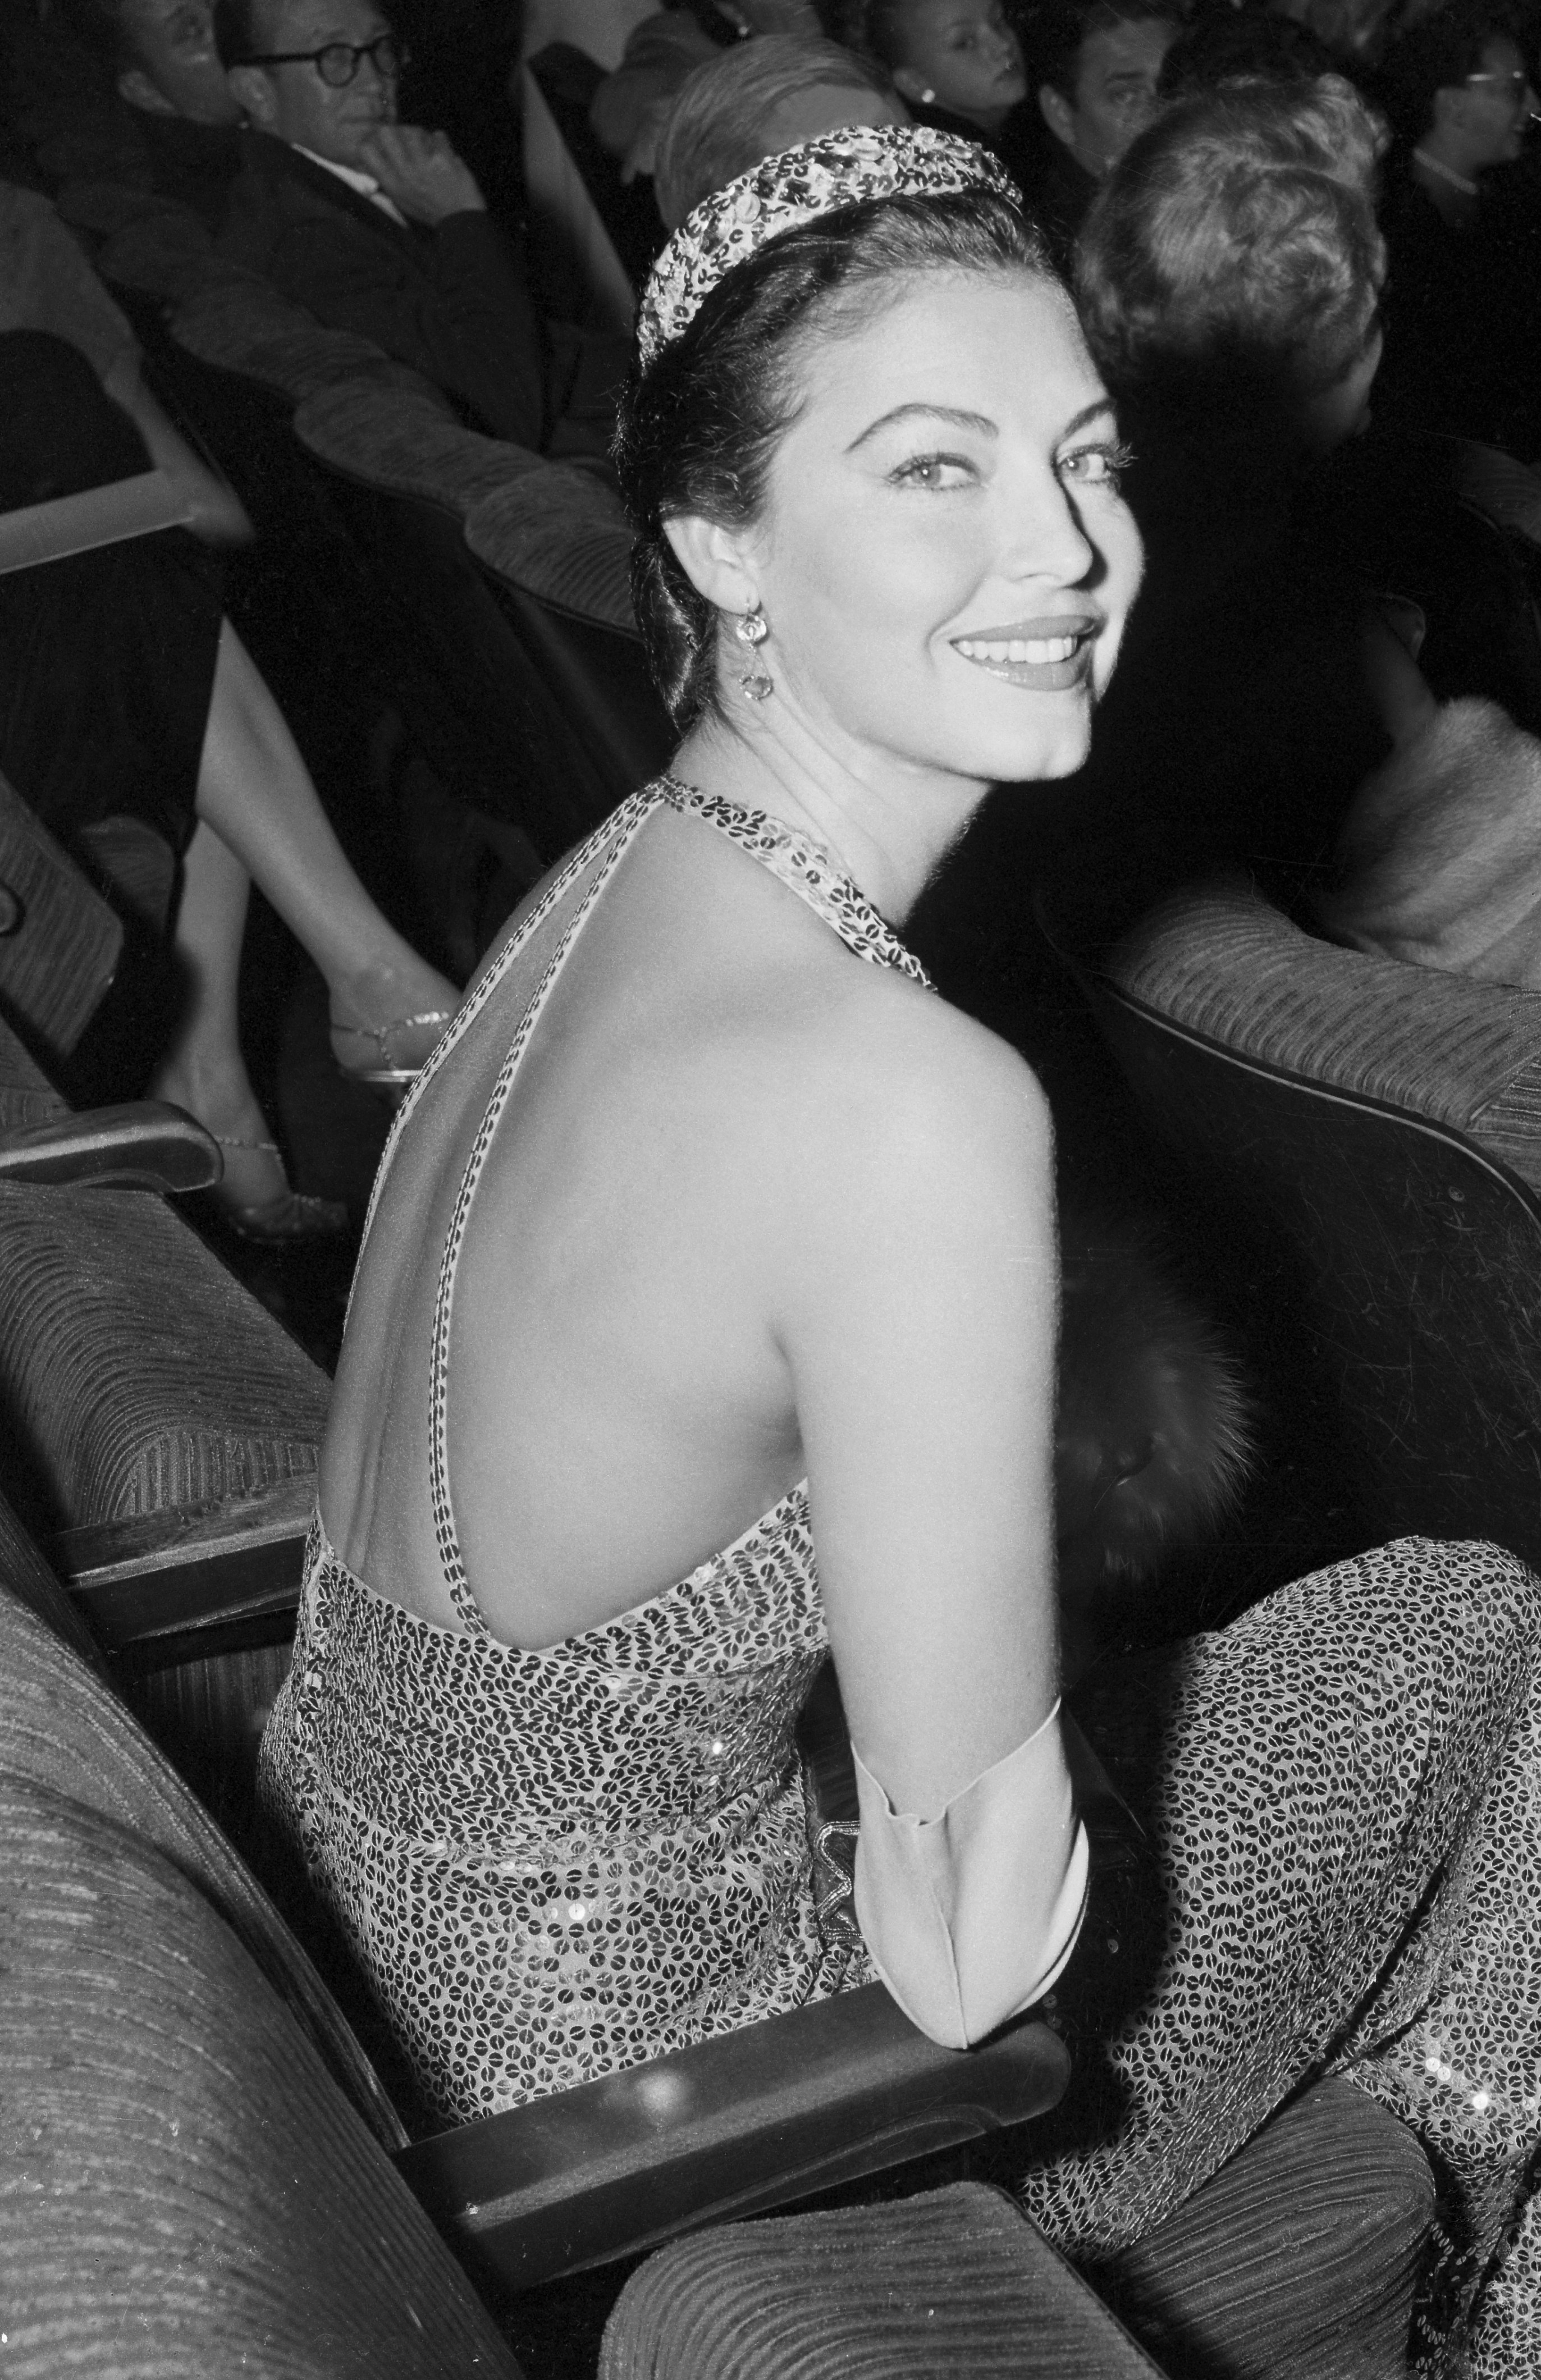 Ava Gardner looking over her shoulder in a gown while sitting in a movie theater seat